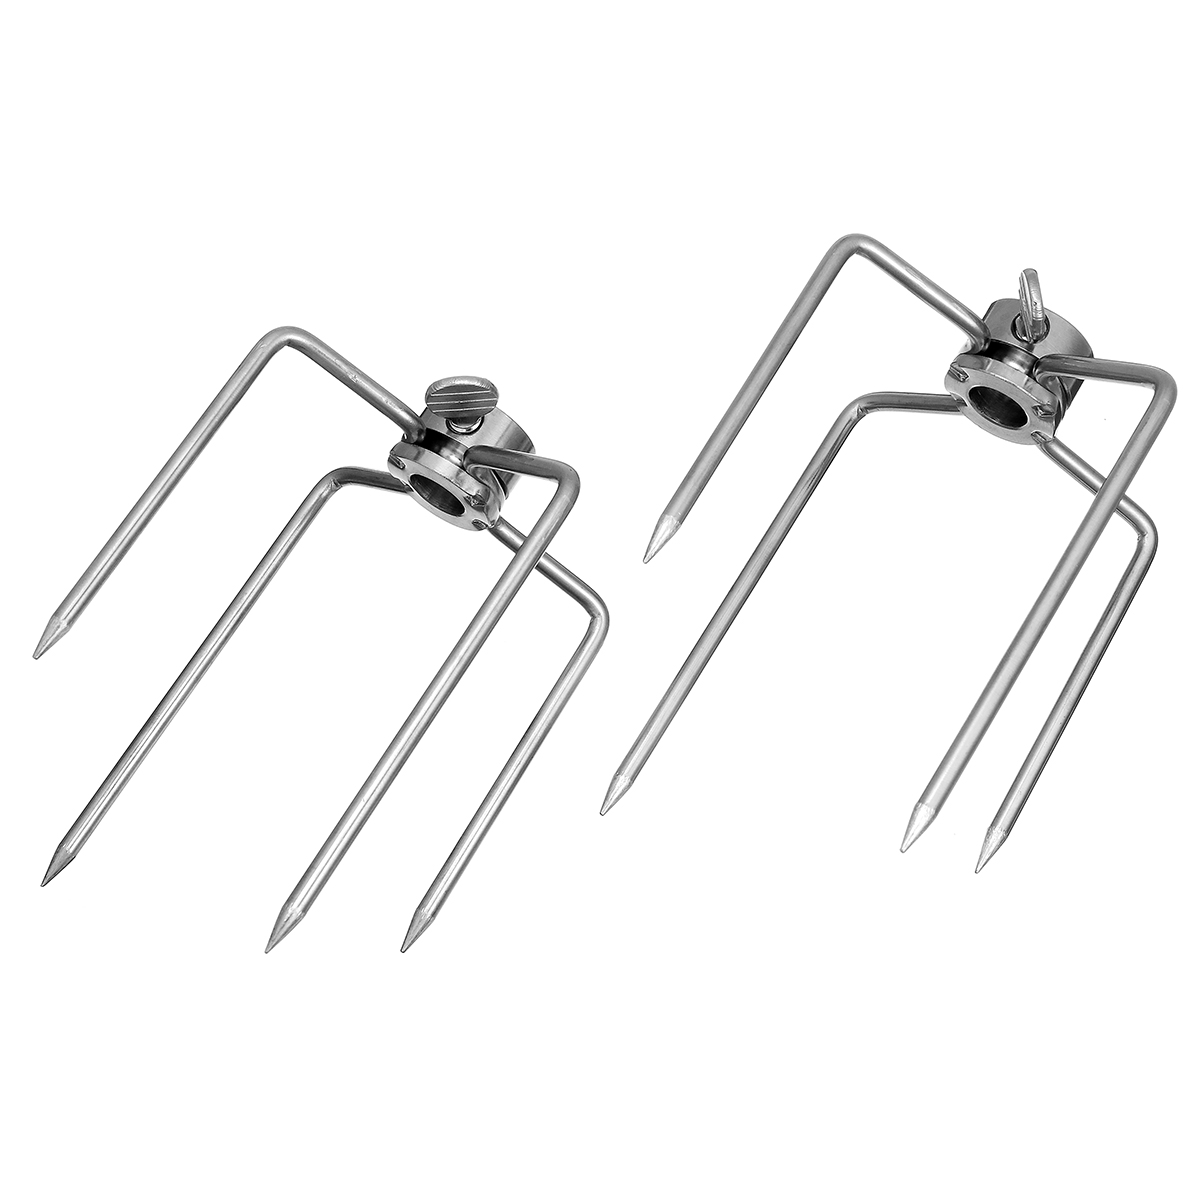 

2Pcs BBQ Stainless Steel Spit Fork Chicken Grill BBQ Stick Fork Rotisserie Barbecue Accessories